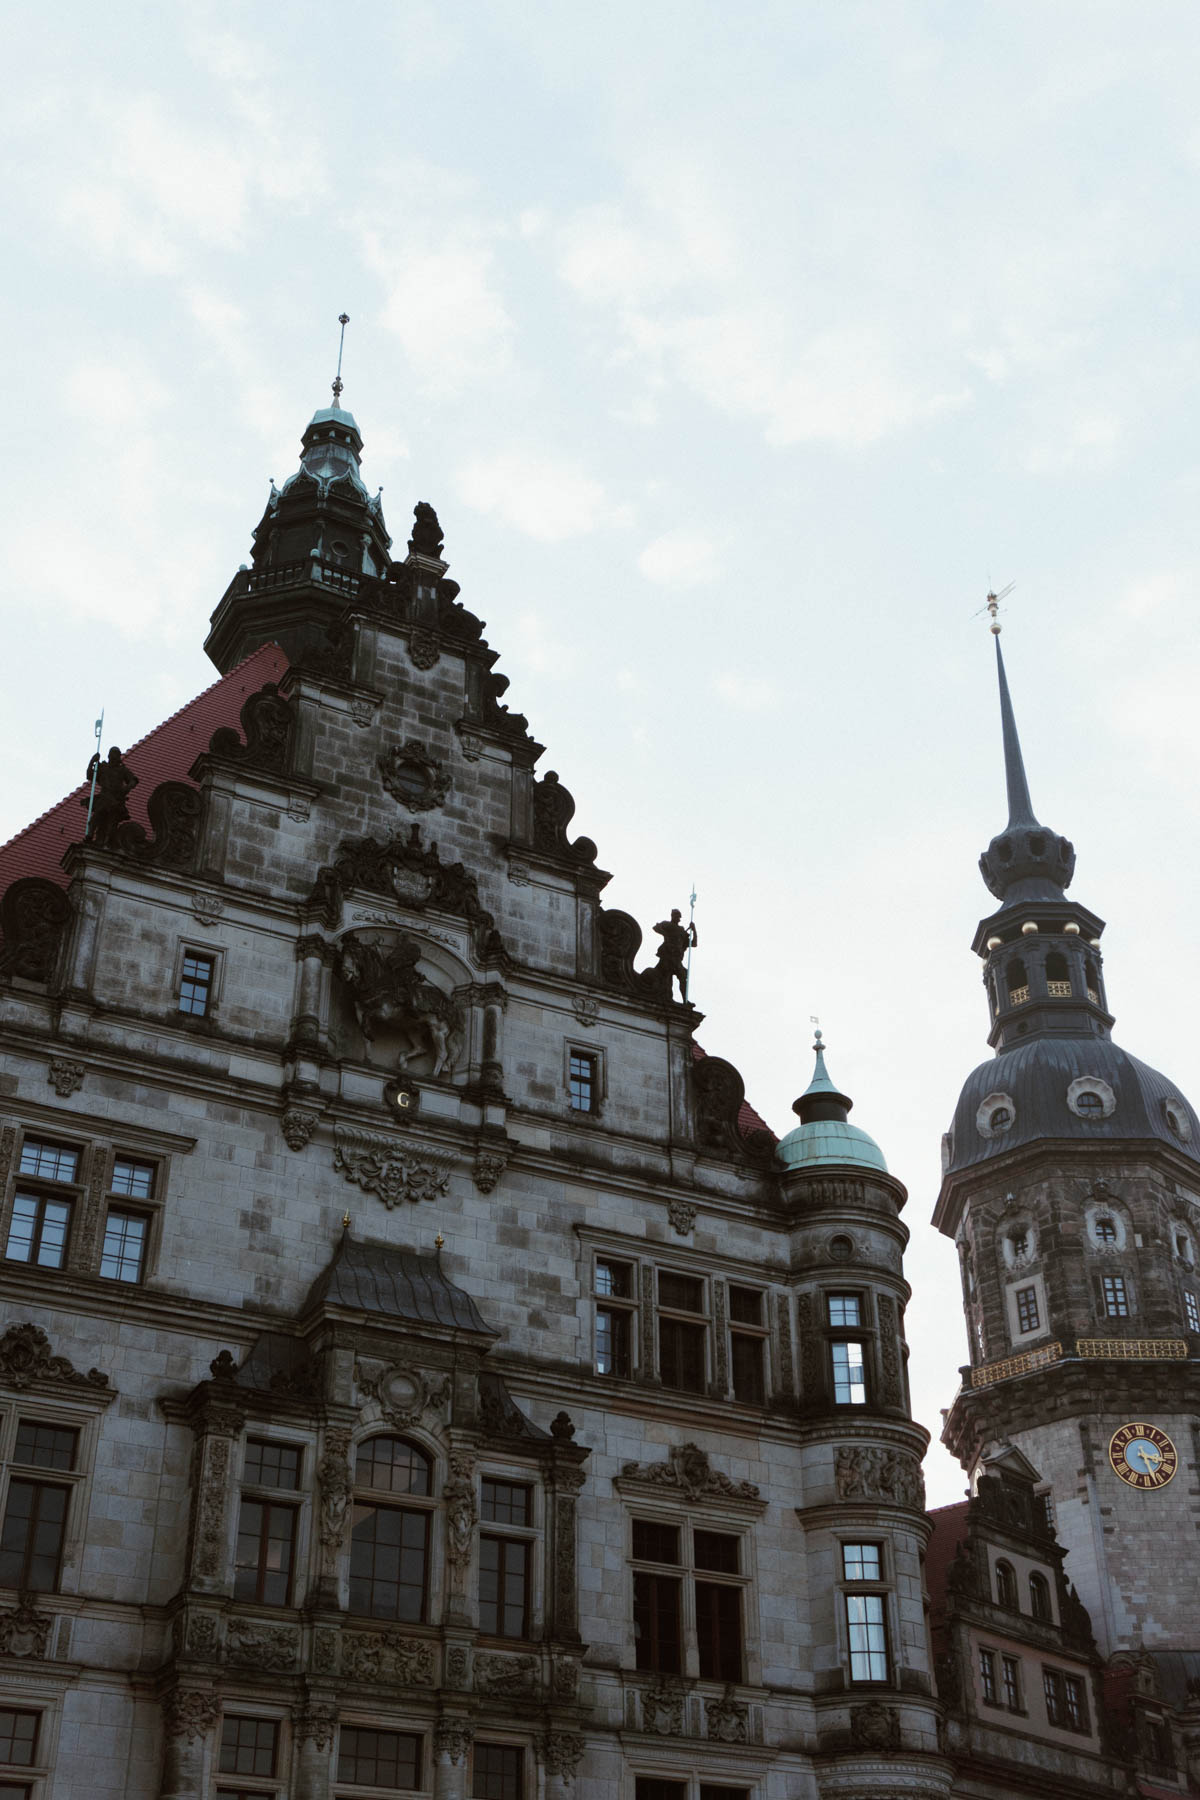 Dresden Germany Travel Guide - Day Trip from Berlin - European Architecture / RG Daily Blog